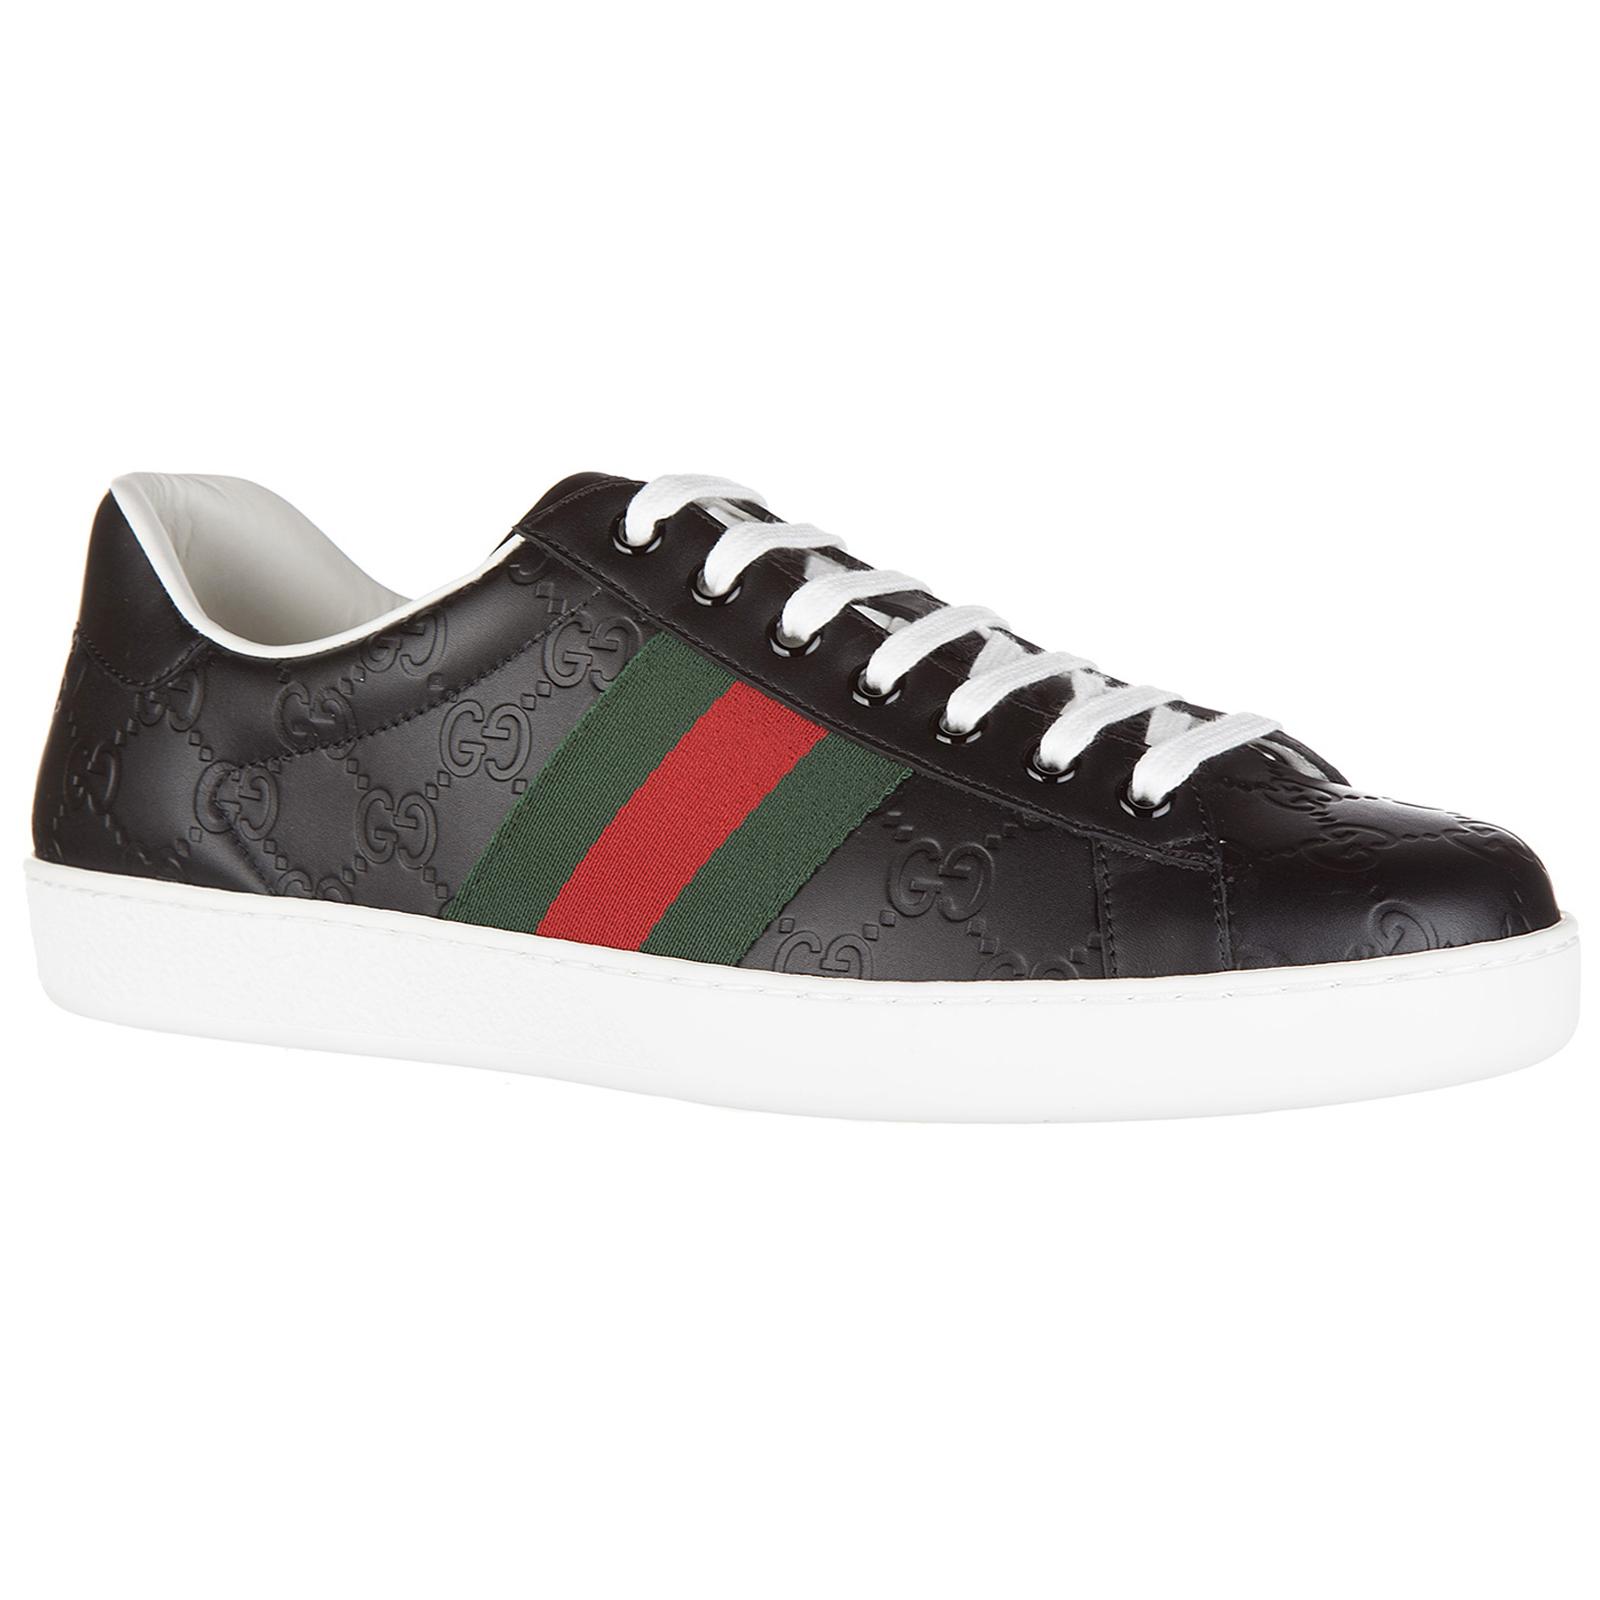 Gucci Men's Shoes Leather Trainers Sneakers Signature in Nero (Black ...